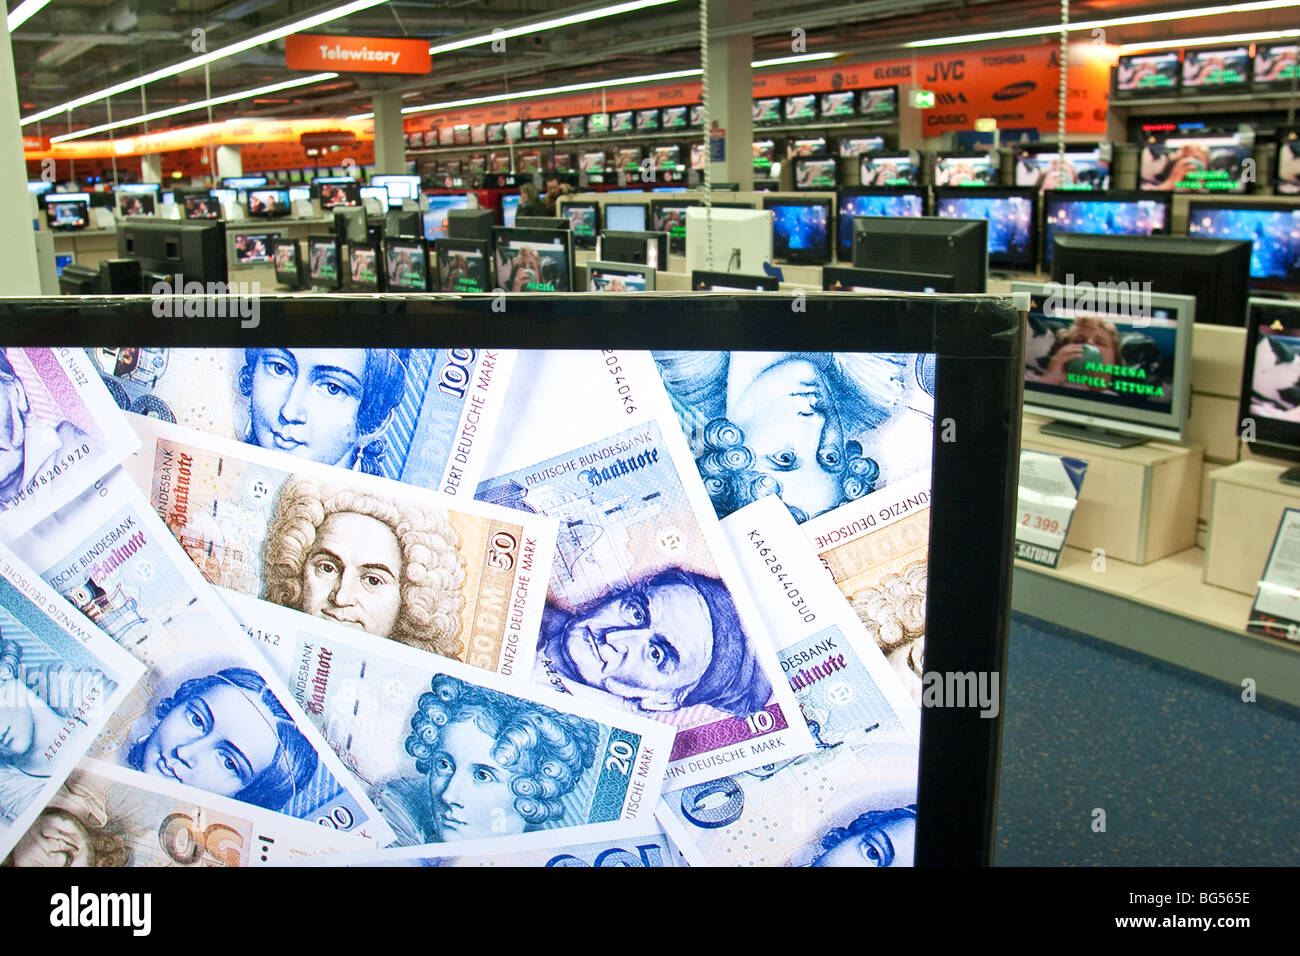 Plasma TV for sale in a supermarket shop in Katowice, Poland Stock Photo